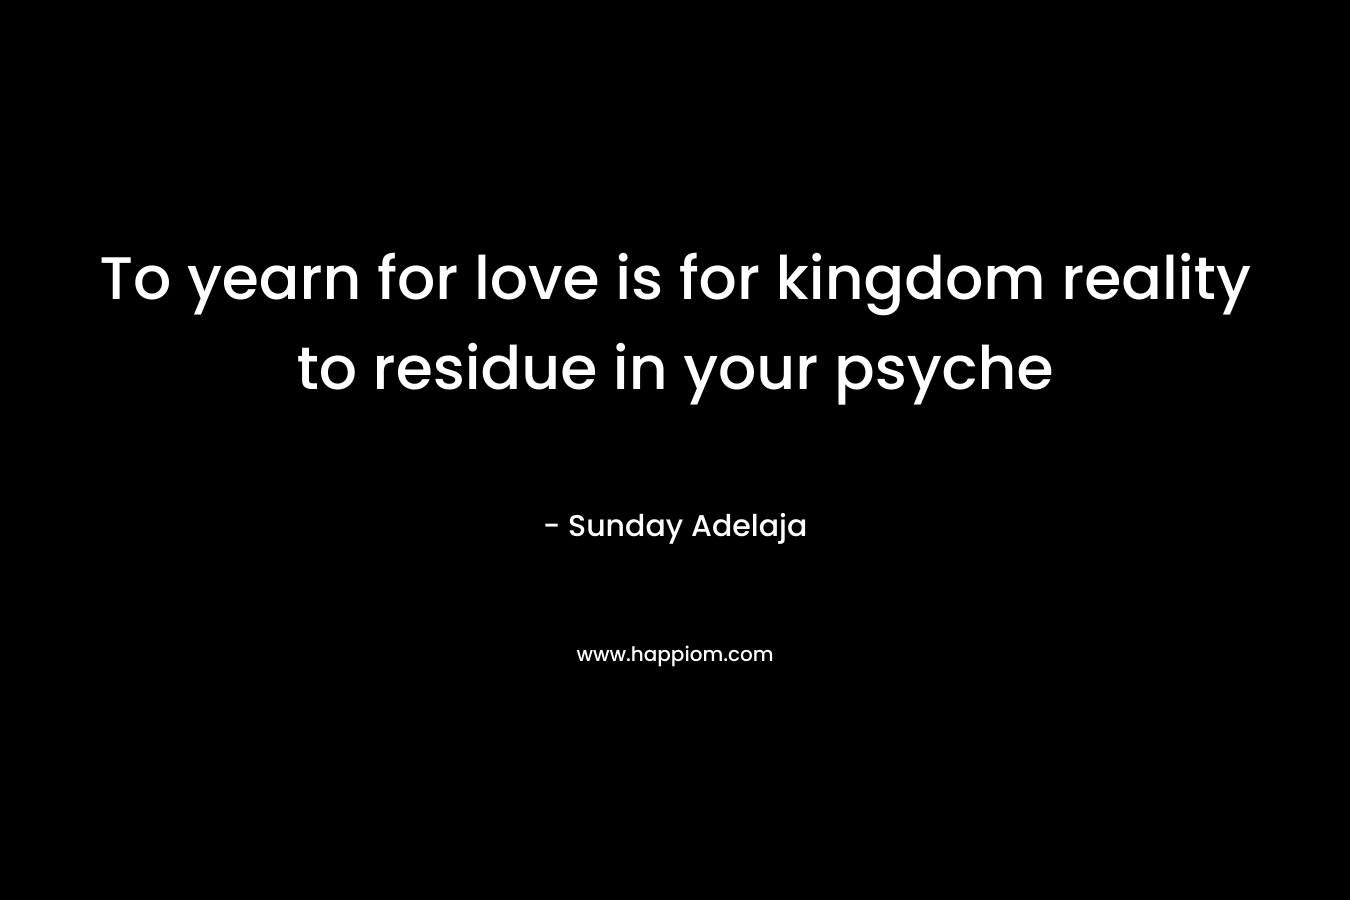 To yearn for love is for kingdom reality to residue in your psyche